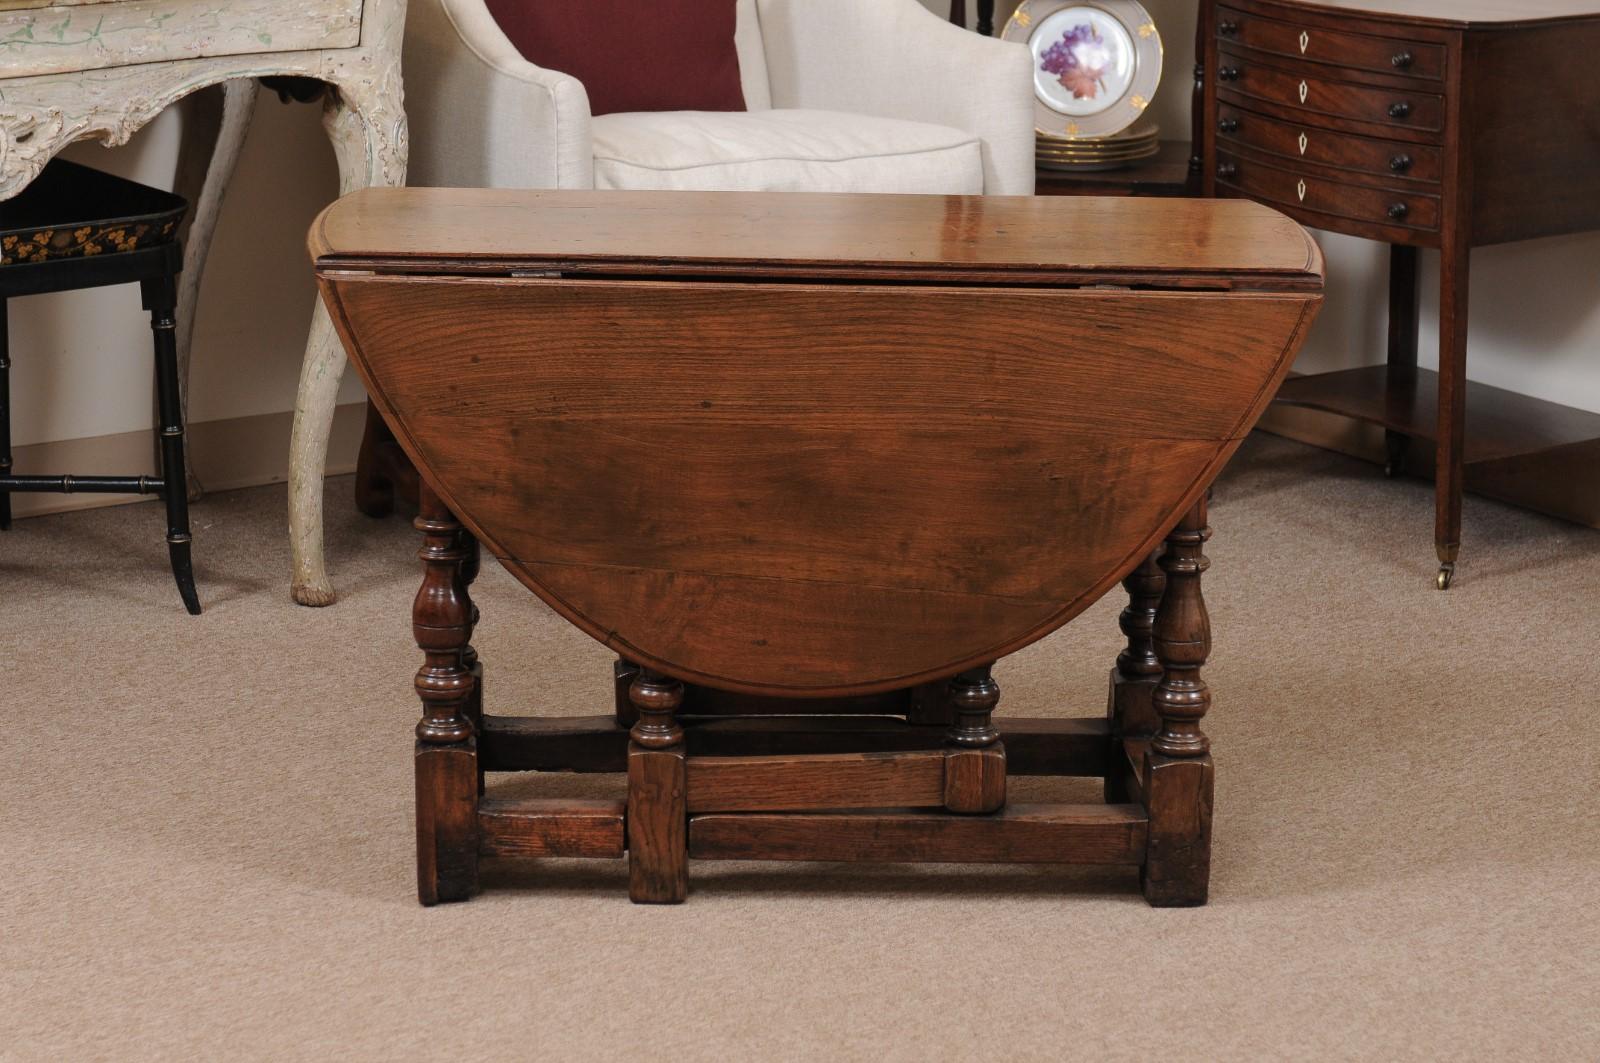 18th Century English Walnut Gate Leg Table with Drop Leaves & Turned Legs For Sale 7